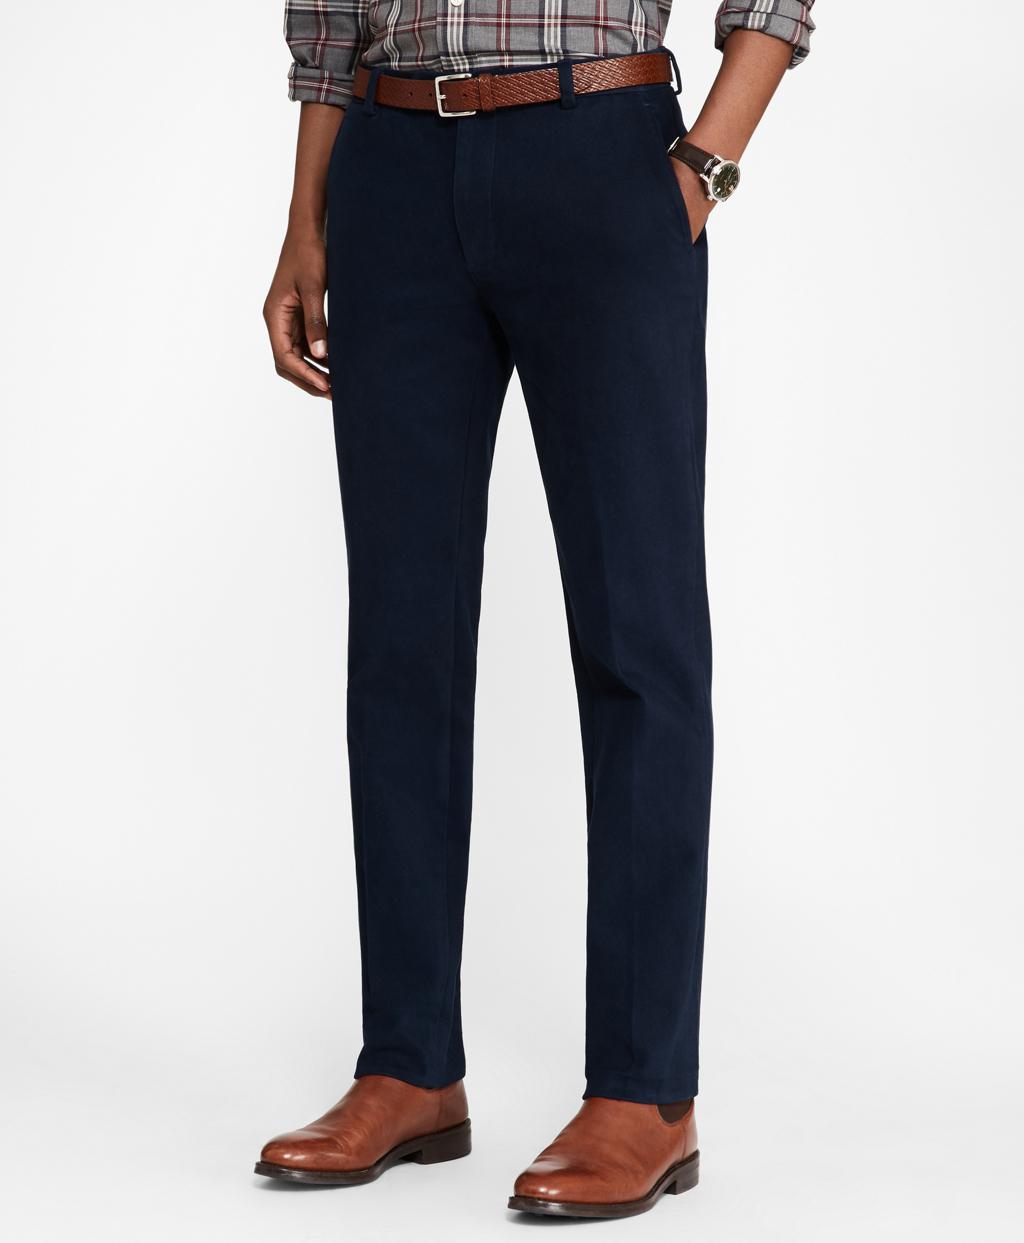 Lyst - Brooks Brothers Milano Fit Brushed Twill Stretch Chinos in Blue ...